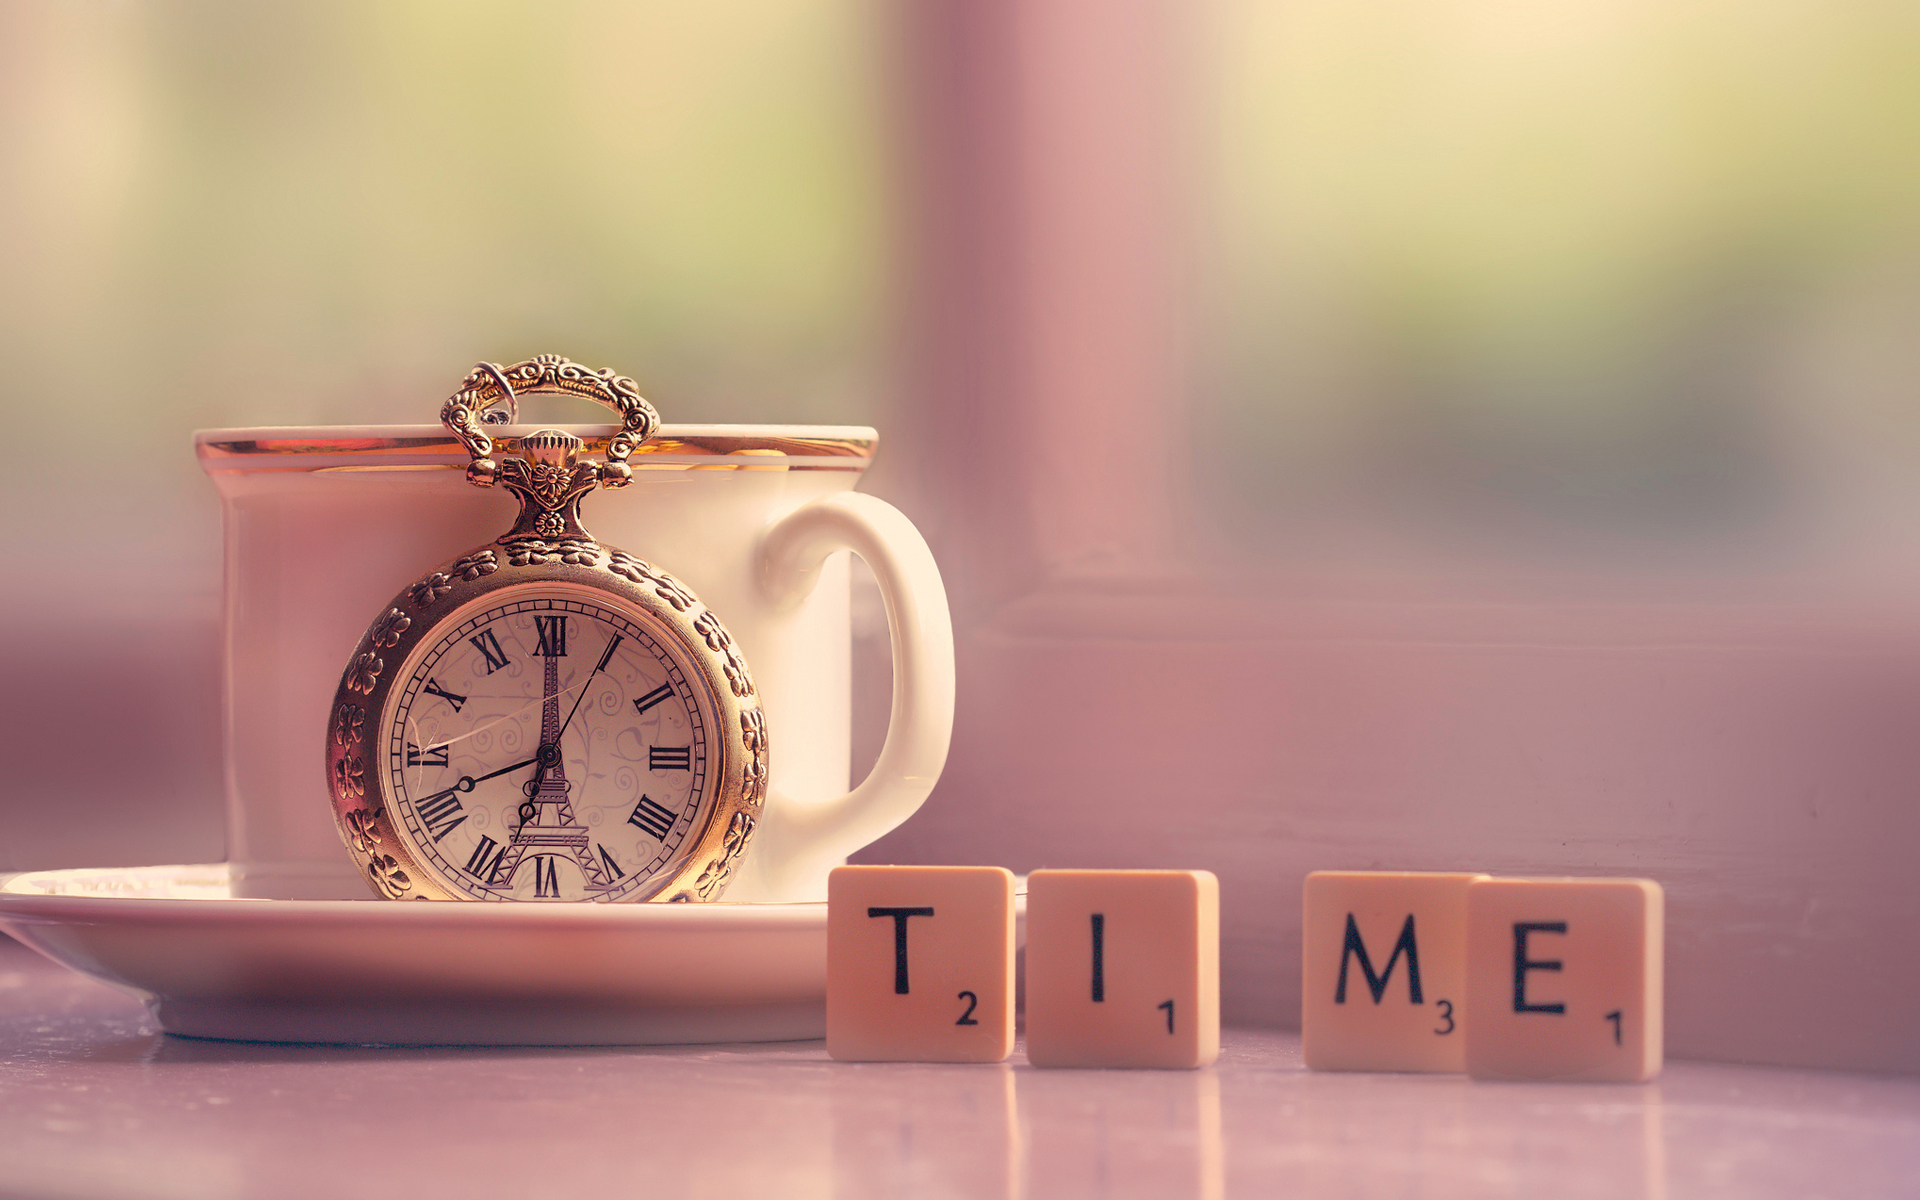 word, still life, macro, tea, coffee, man made, watch, cup, number download HD wallpaper